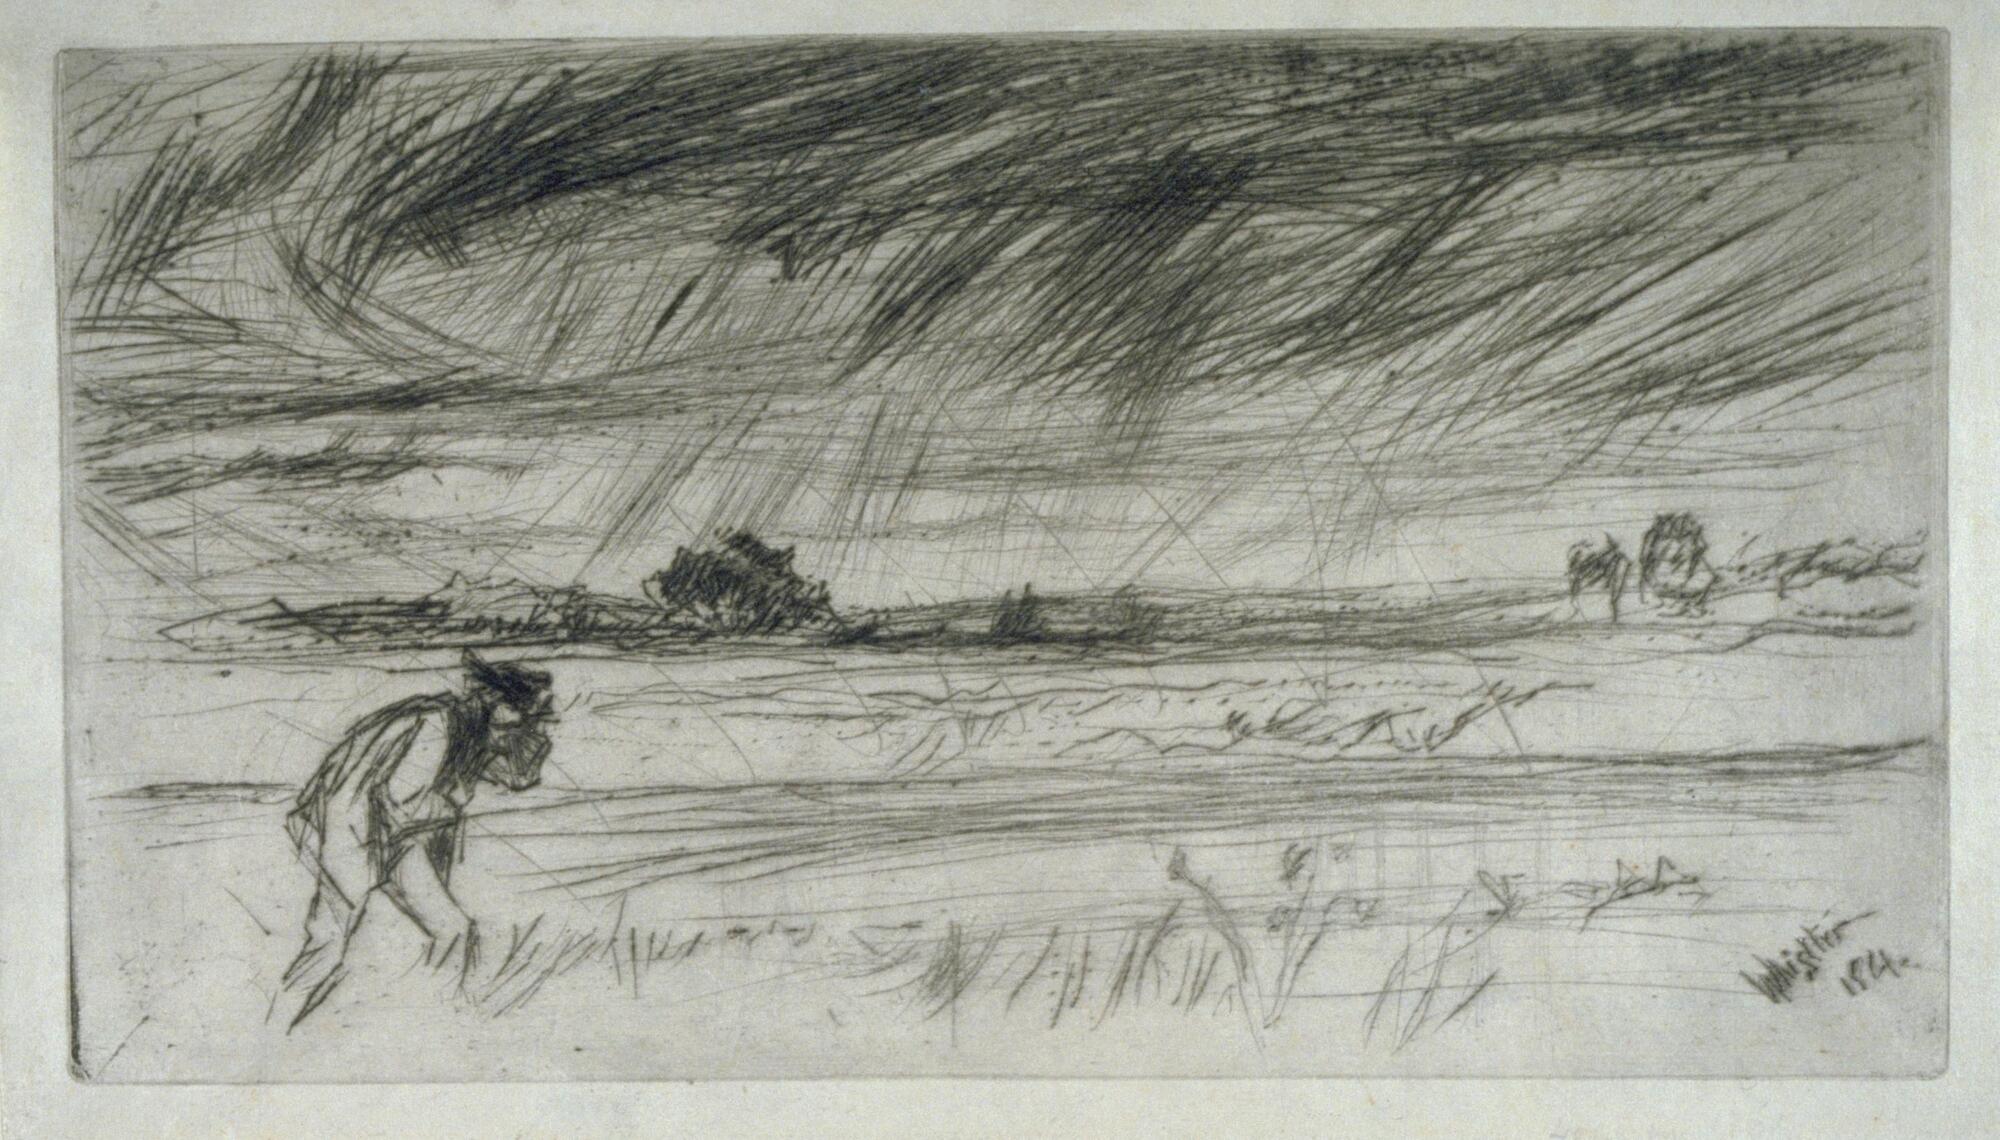 A stormy and blustery landscape dominates the scene; at the lower left corner, a man with a moustache leans into the wind, clutching his coat in front of him with his right hand and holding his hat in place with his left hand. The landscape is flat and largely open; small groups of trees are visible in the distance and dark lines in the sky represent clouds and squall lines. In the center of the image are faint diagonal lines "cancelling" the plate.